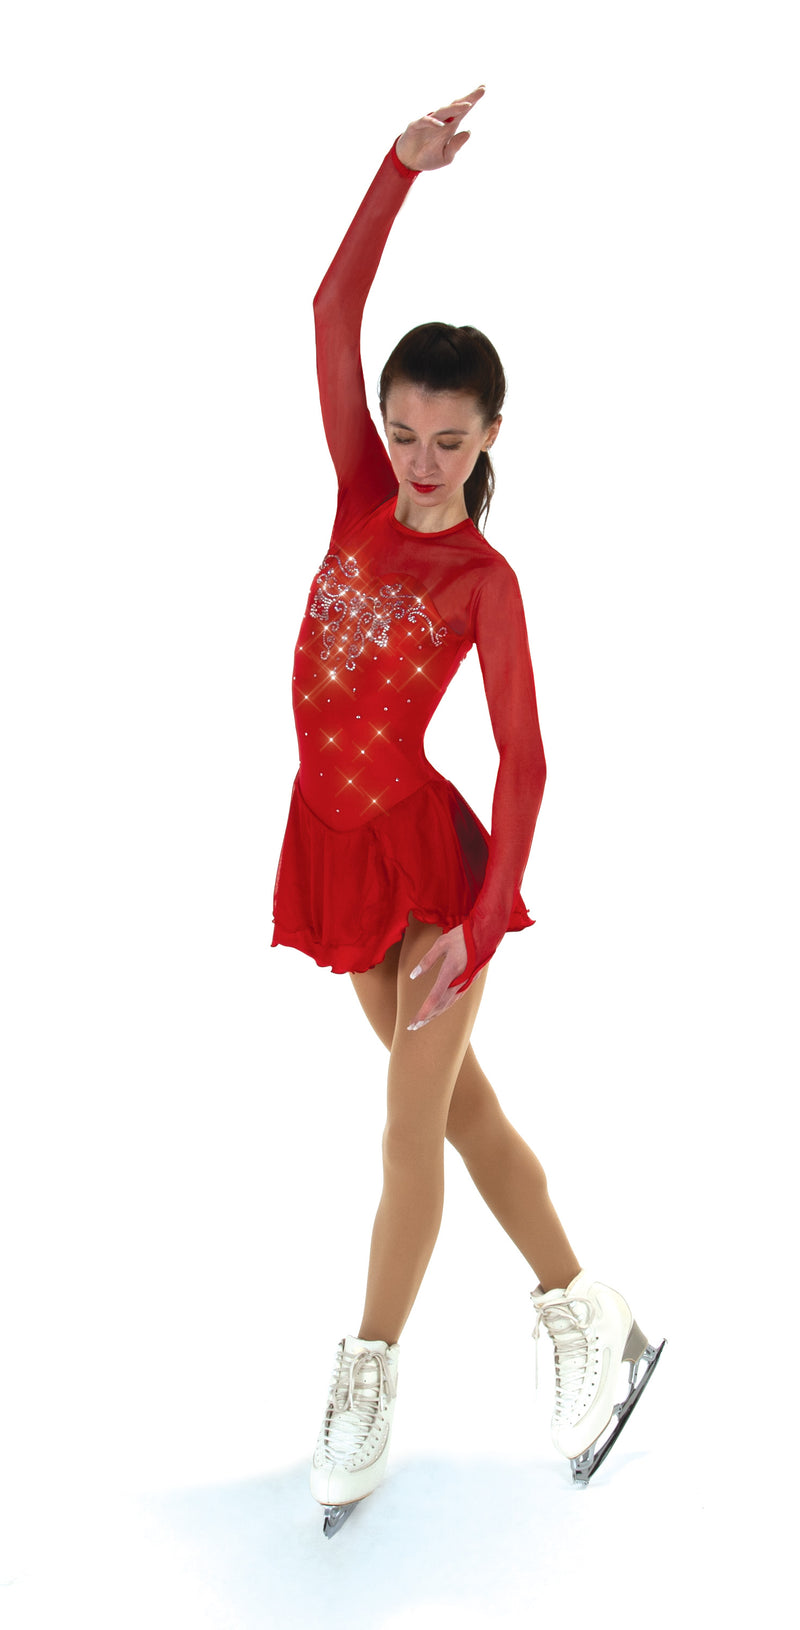 JRF22007-R Solitaire Sweetheart Figure Skate Dress Red